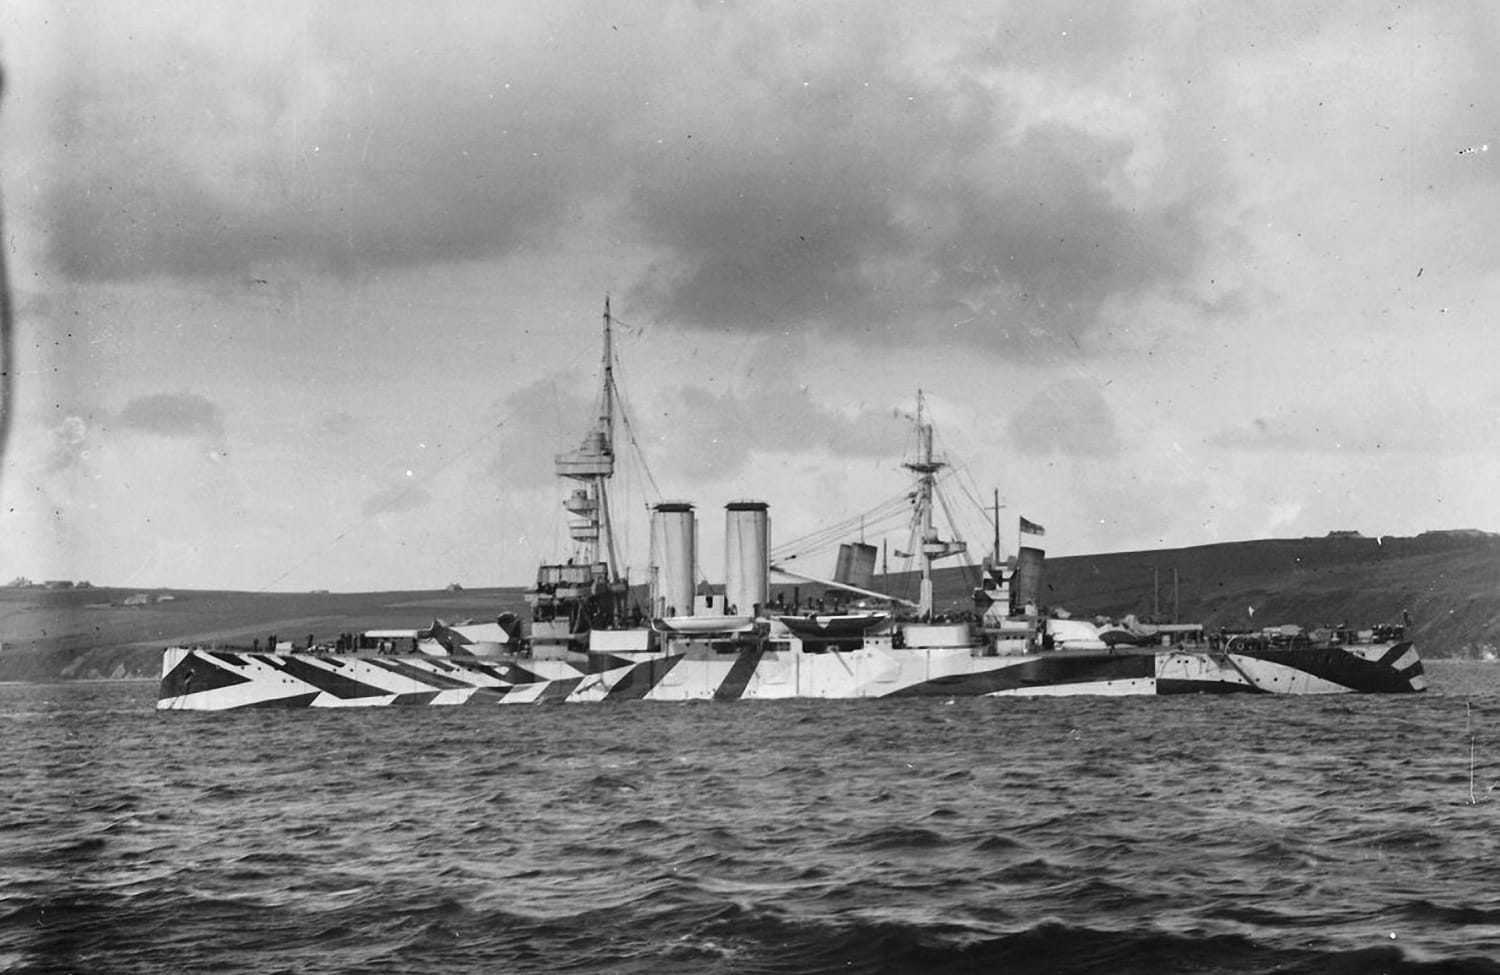 King Edward VII-class pre-dreadnought battleship HMS Commonwealth in dazzle camouflage, at anchor at Scapa Flow, 1918.